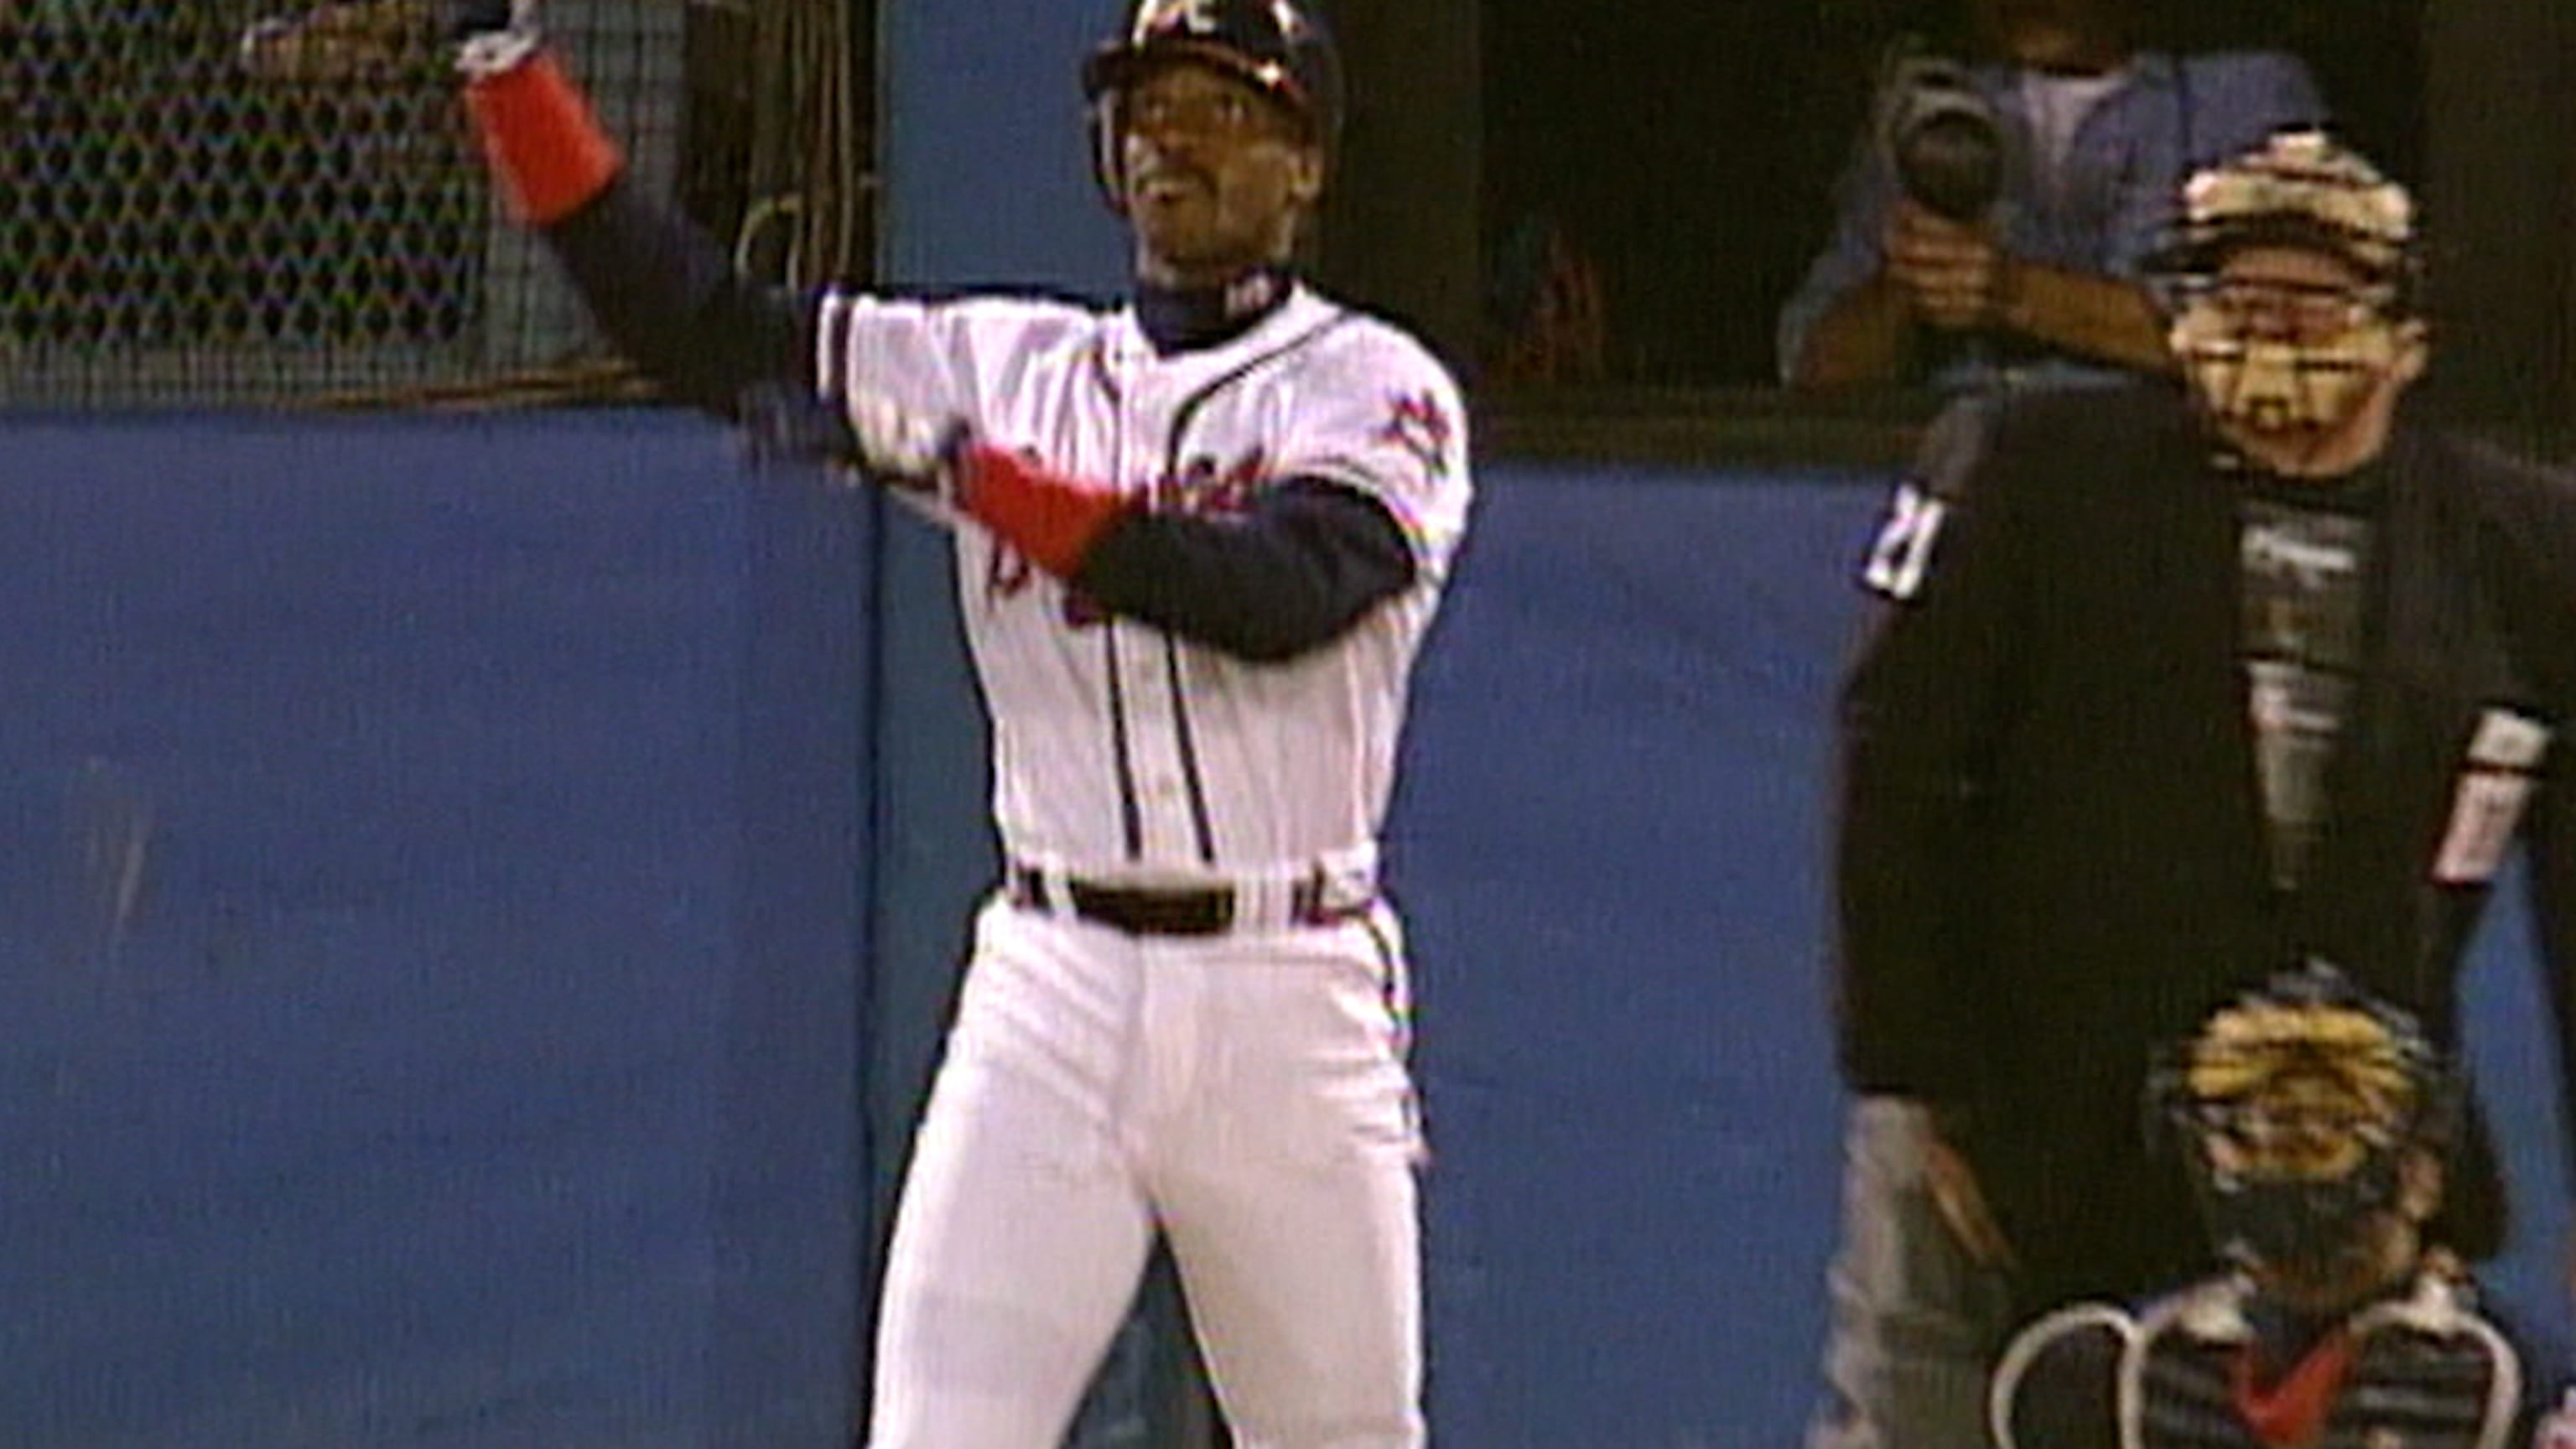 Will Fred McGriff or Dale Murphy make it into the Hall of Fame?